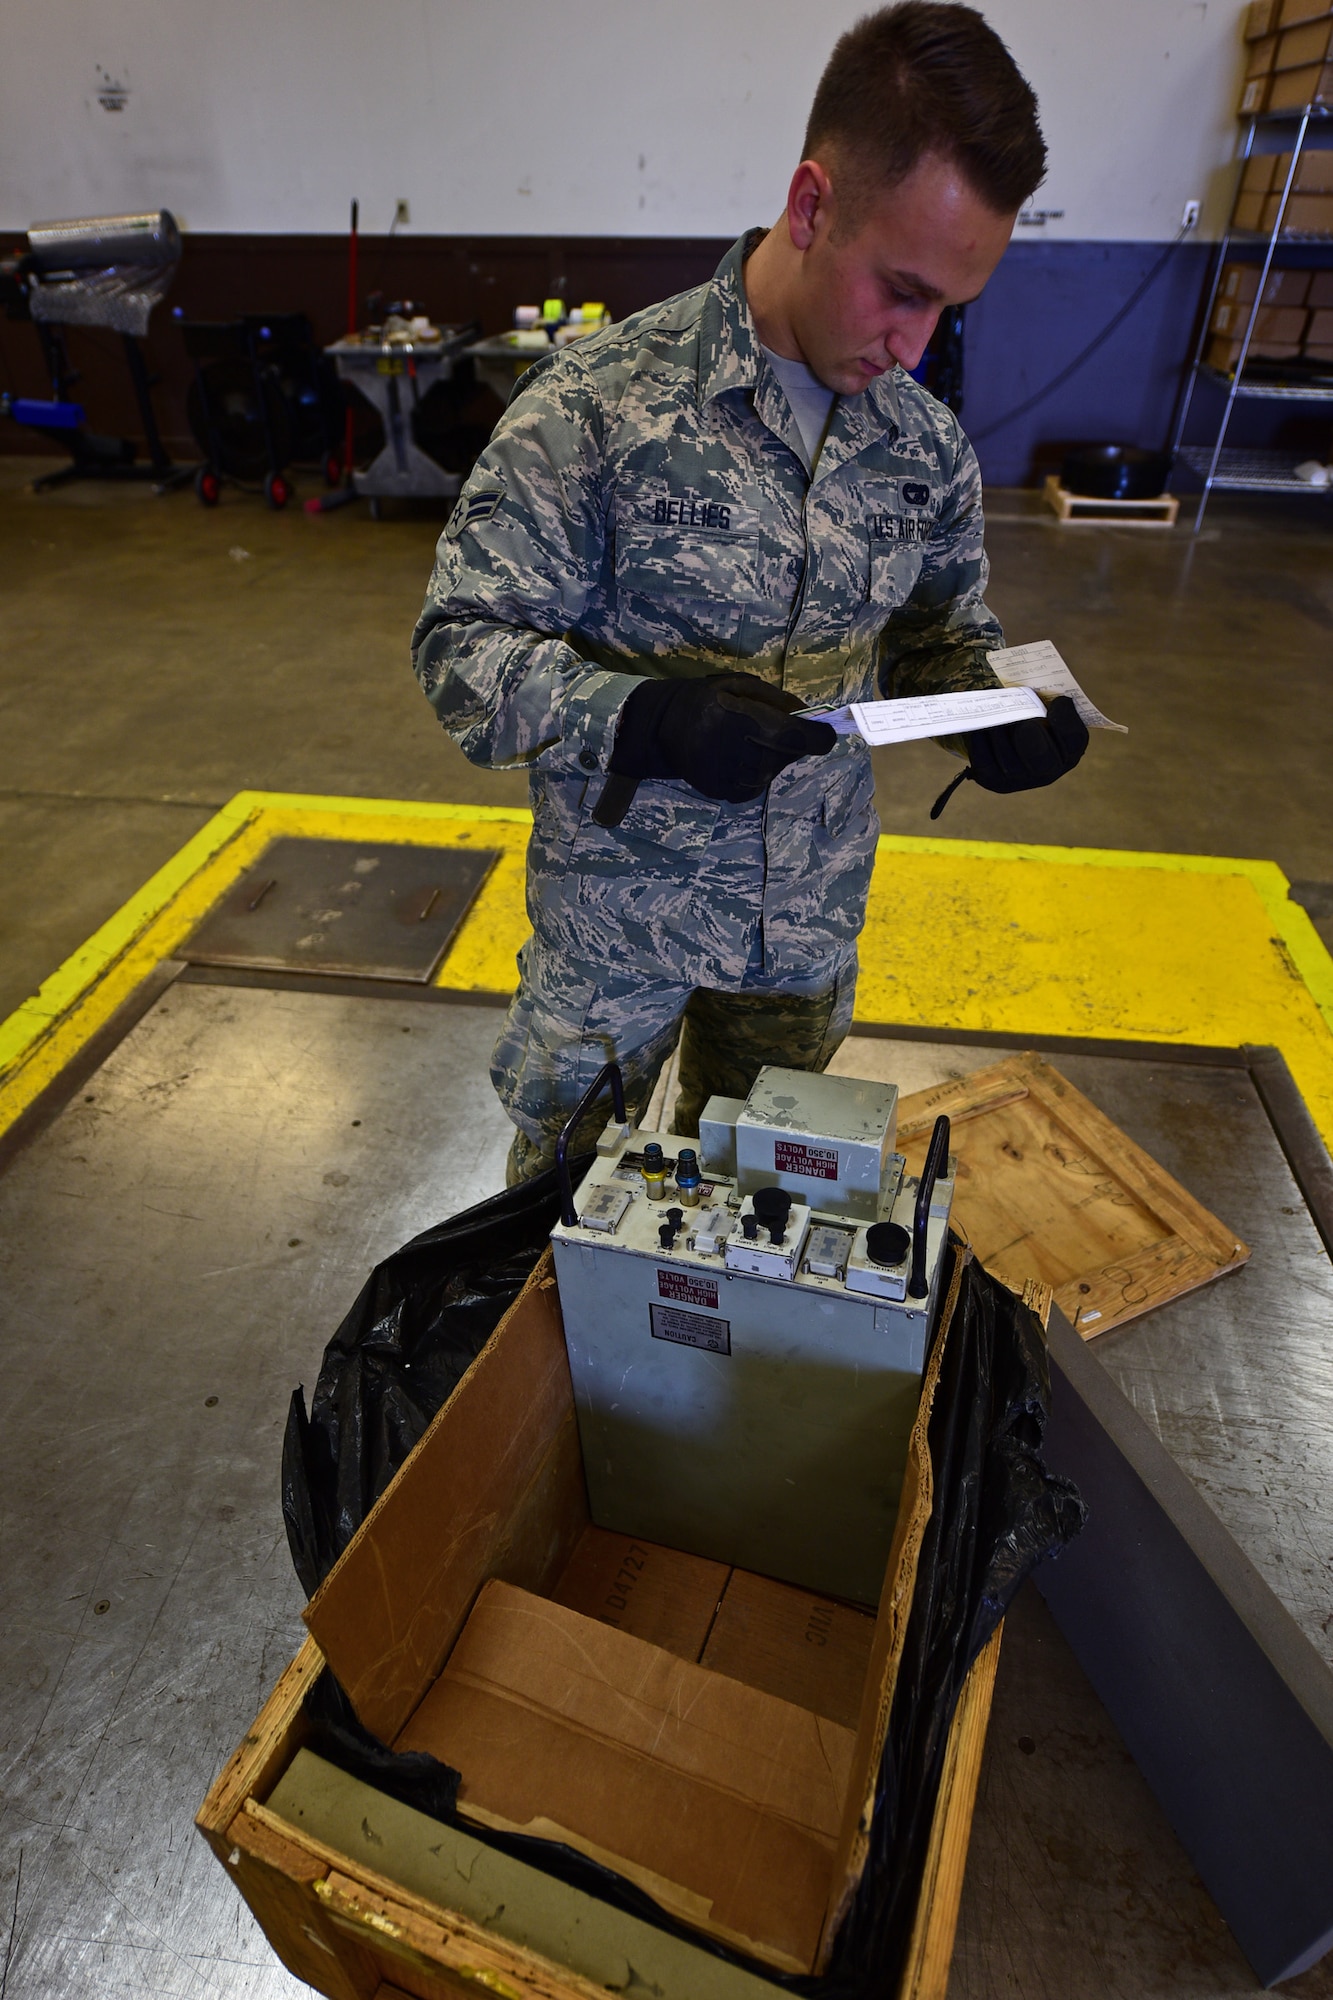 Airman 1st Class James Dellies, a traffic management journeyman assigned to the 28th Logistics Readiness Squadron, checks the packing instructions for a radio transmitter at Ellsworth Air Force Base, S.D., Nov. 8, 2016. The Traffic Management Office is responsible for the entire process of shipping, from packing to labeling. (U.S. Air Force photo by Airman 1st Class James L. Miller)